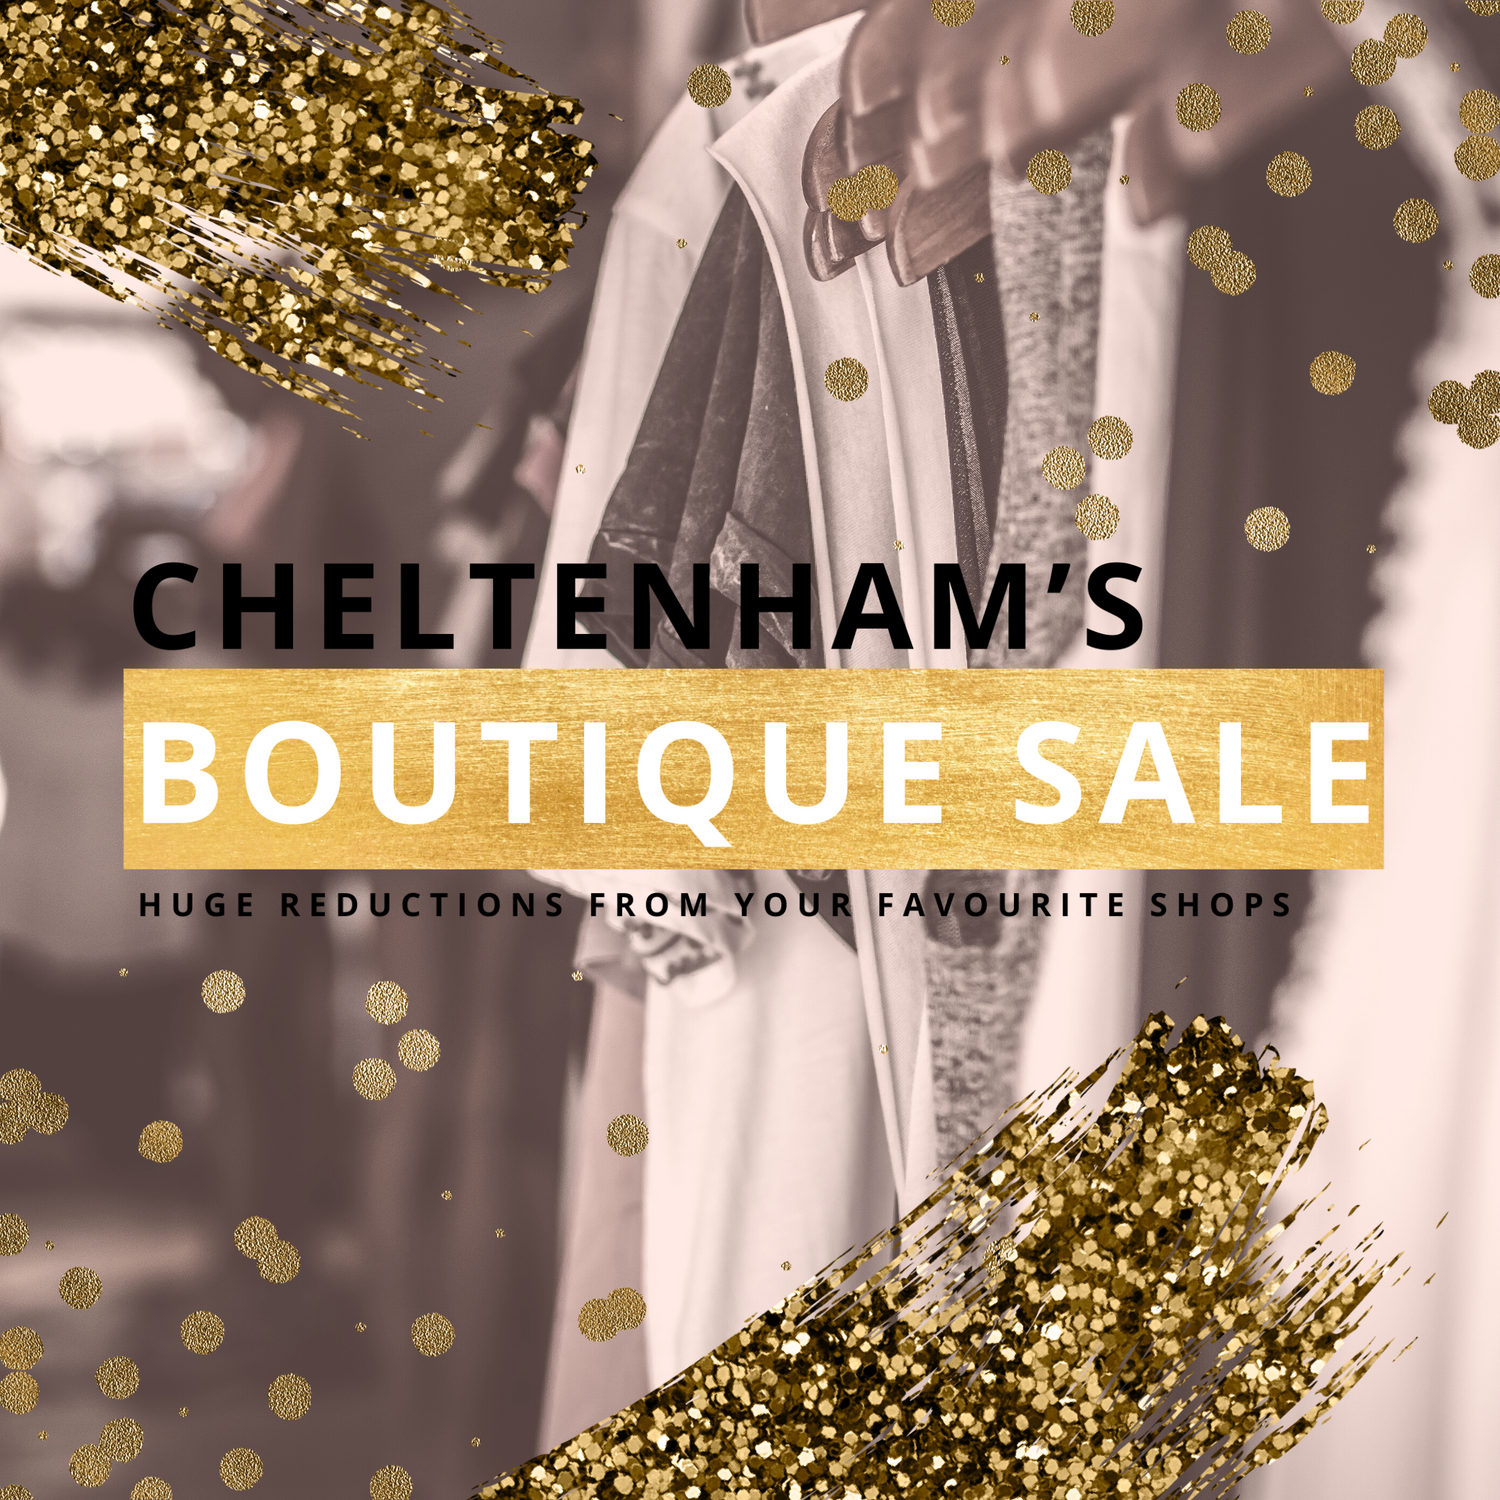 UP TO 70% OFF - The Cheltenham Boutique Sale returns...